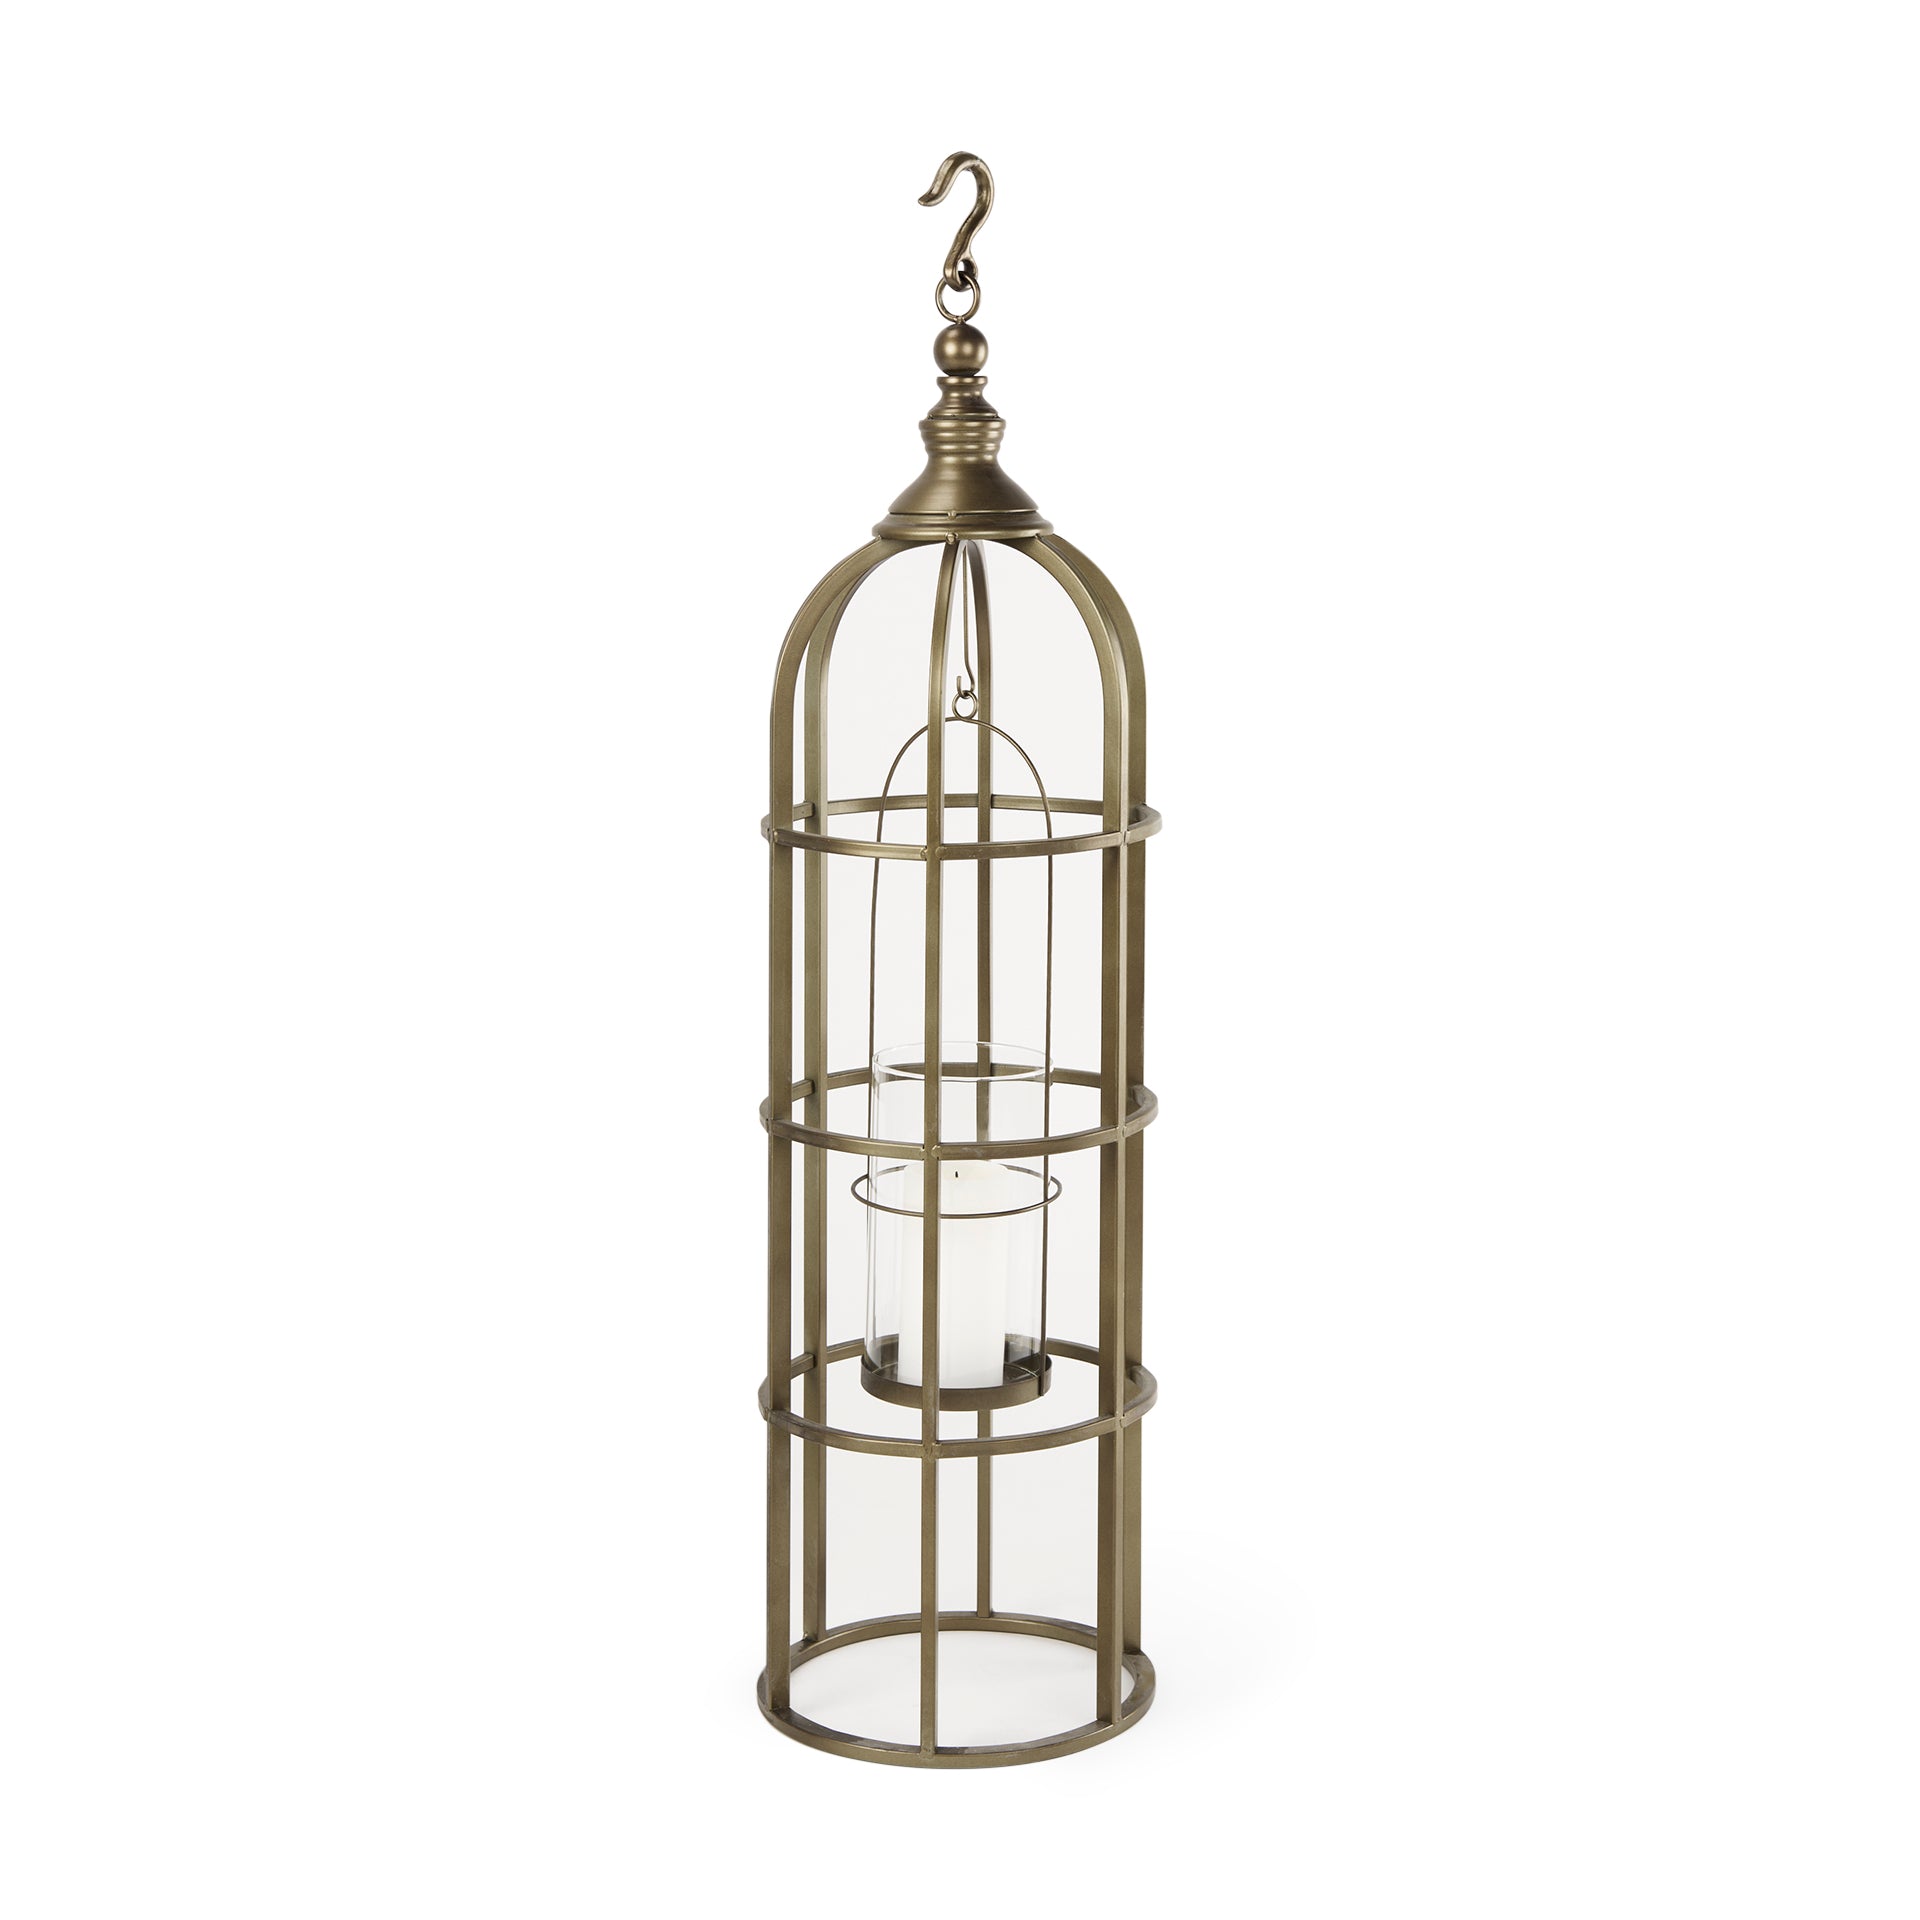 Gerson I Large Cage